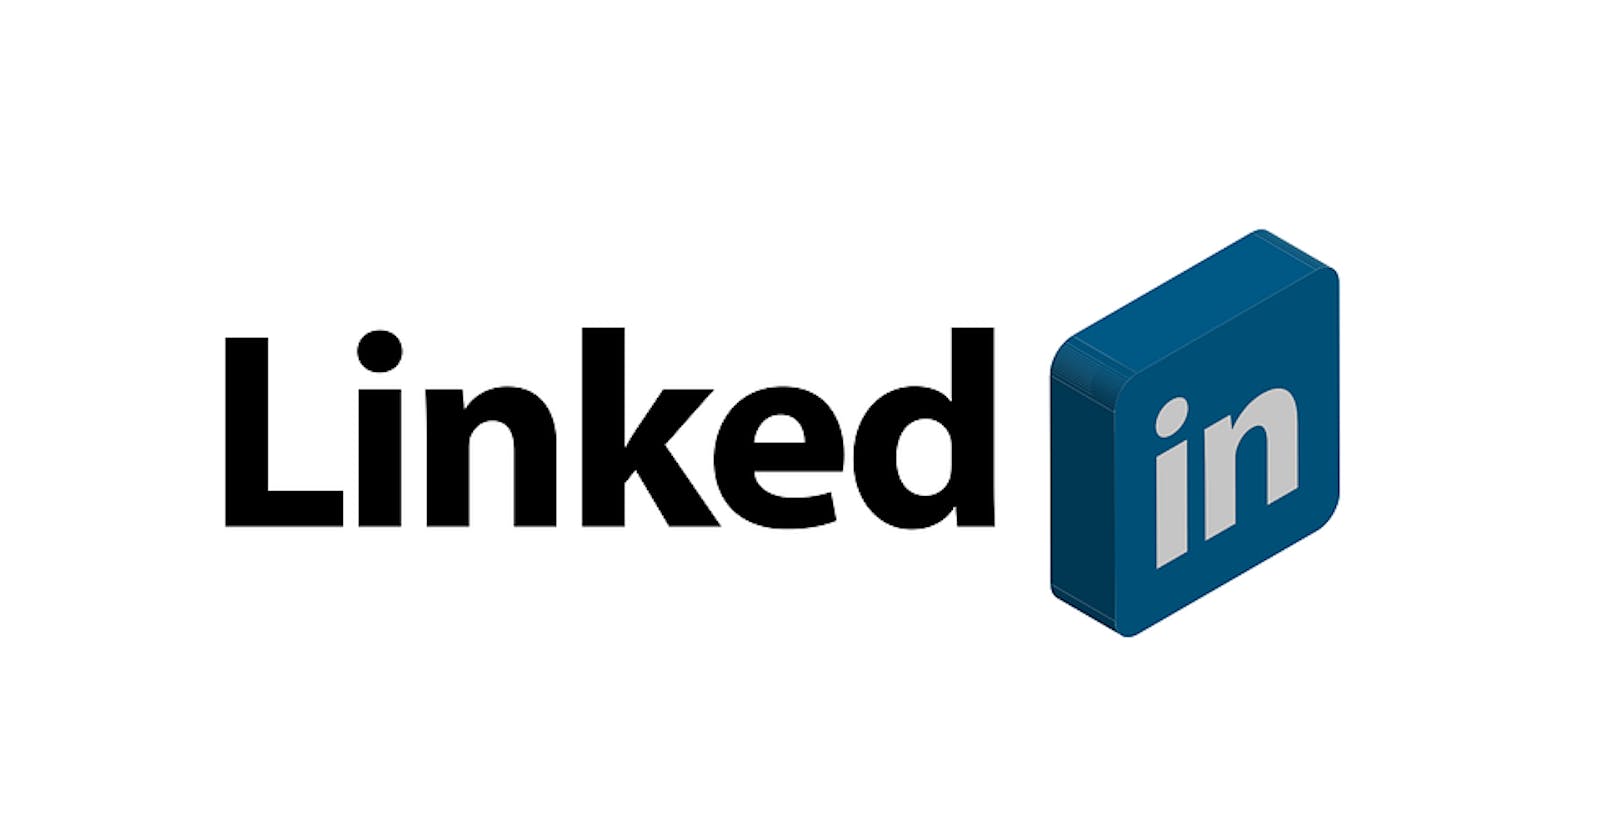 As a college student, how important is your LinkedIn profile?